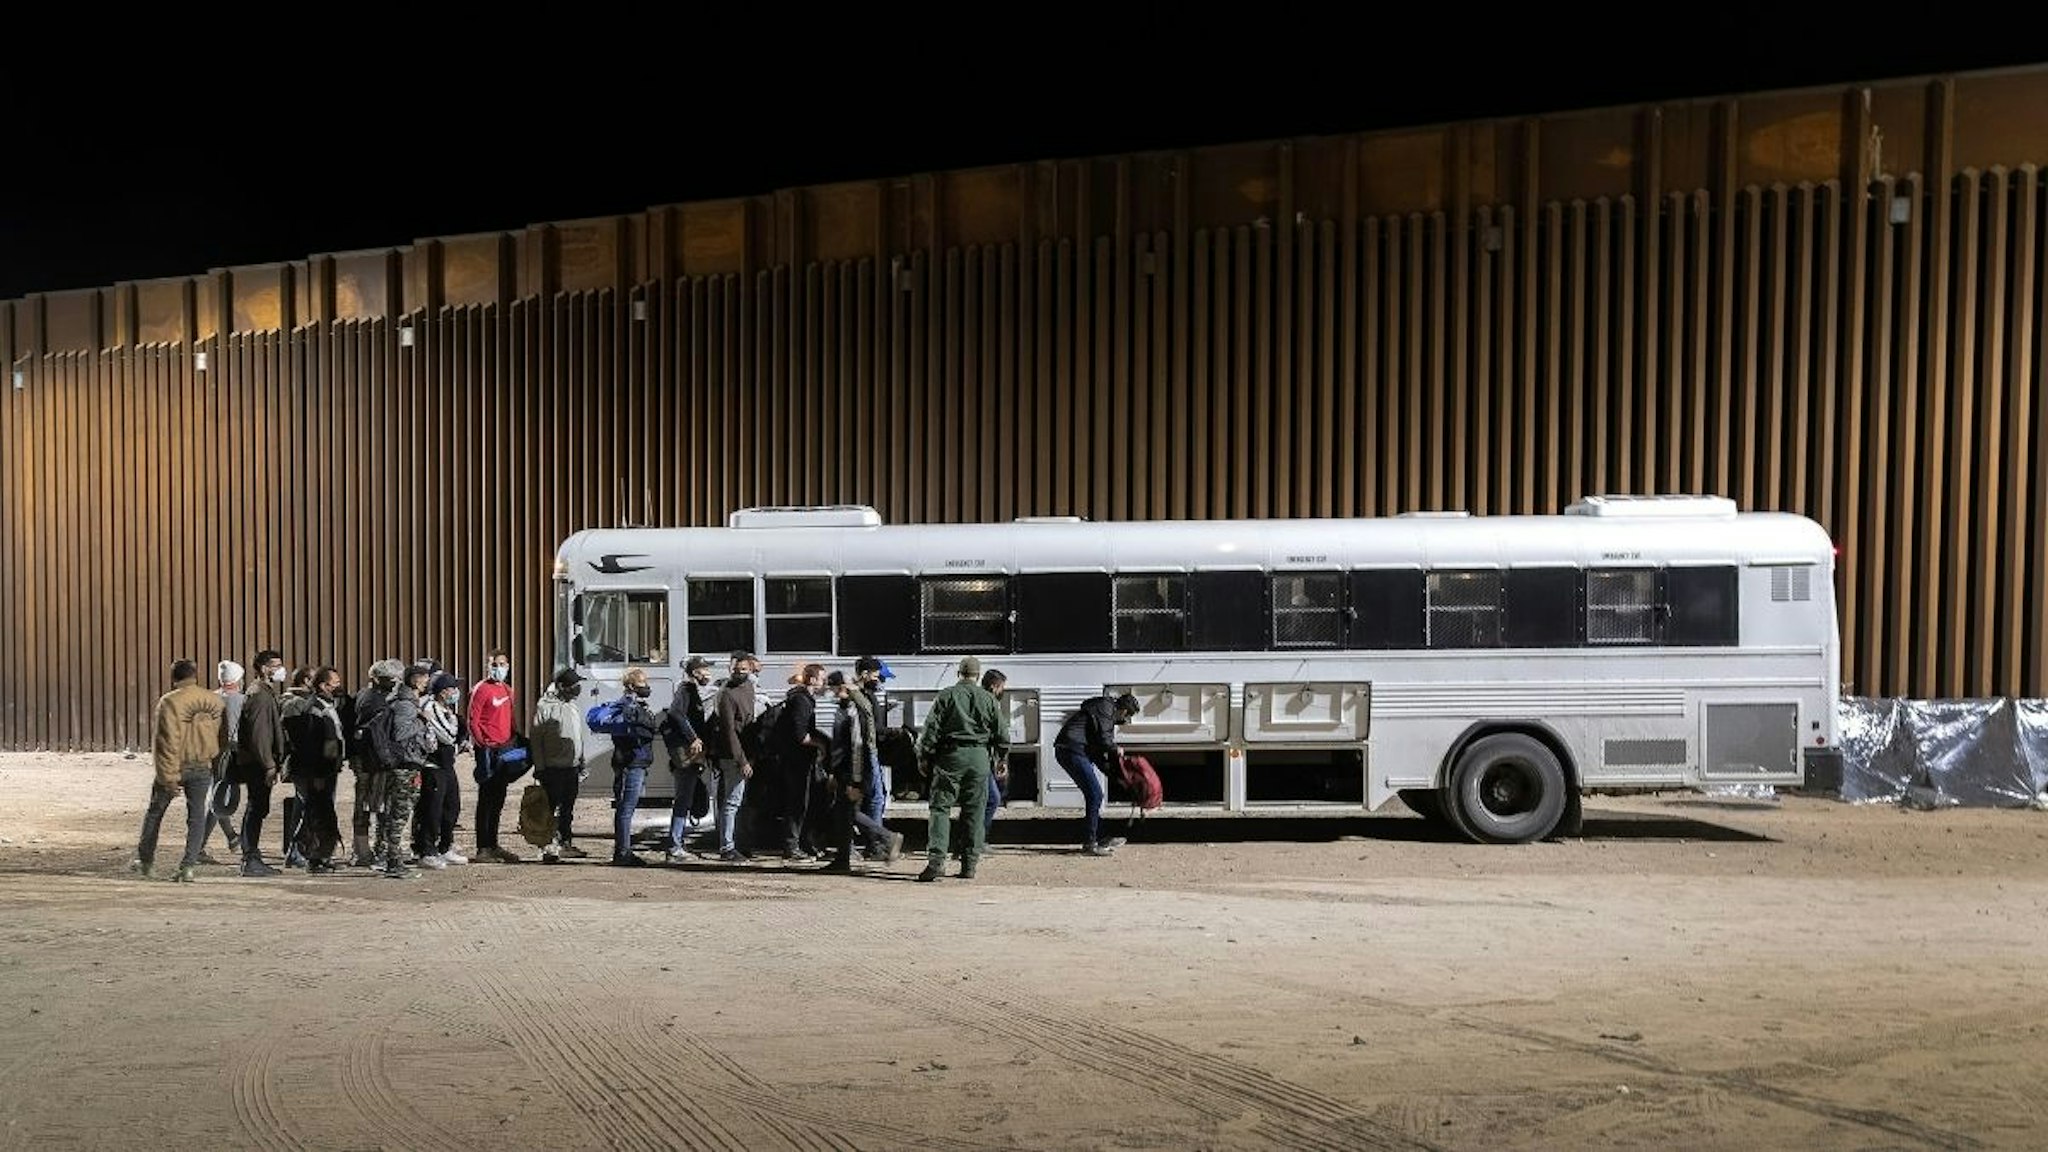 Border Patrol agents load immigrants into a bus for transport to a detention facility on December 08, 2021 through the city of Yuma, Arizona.